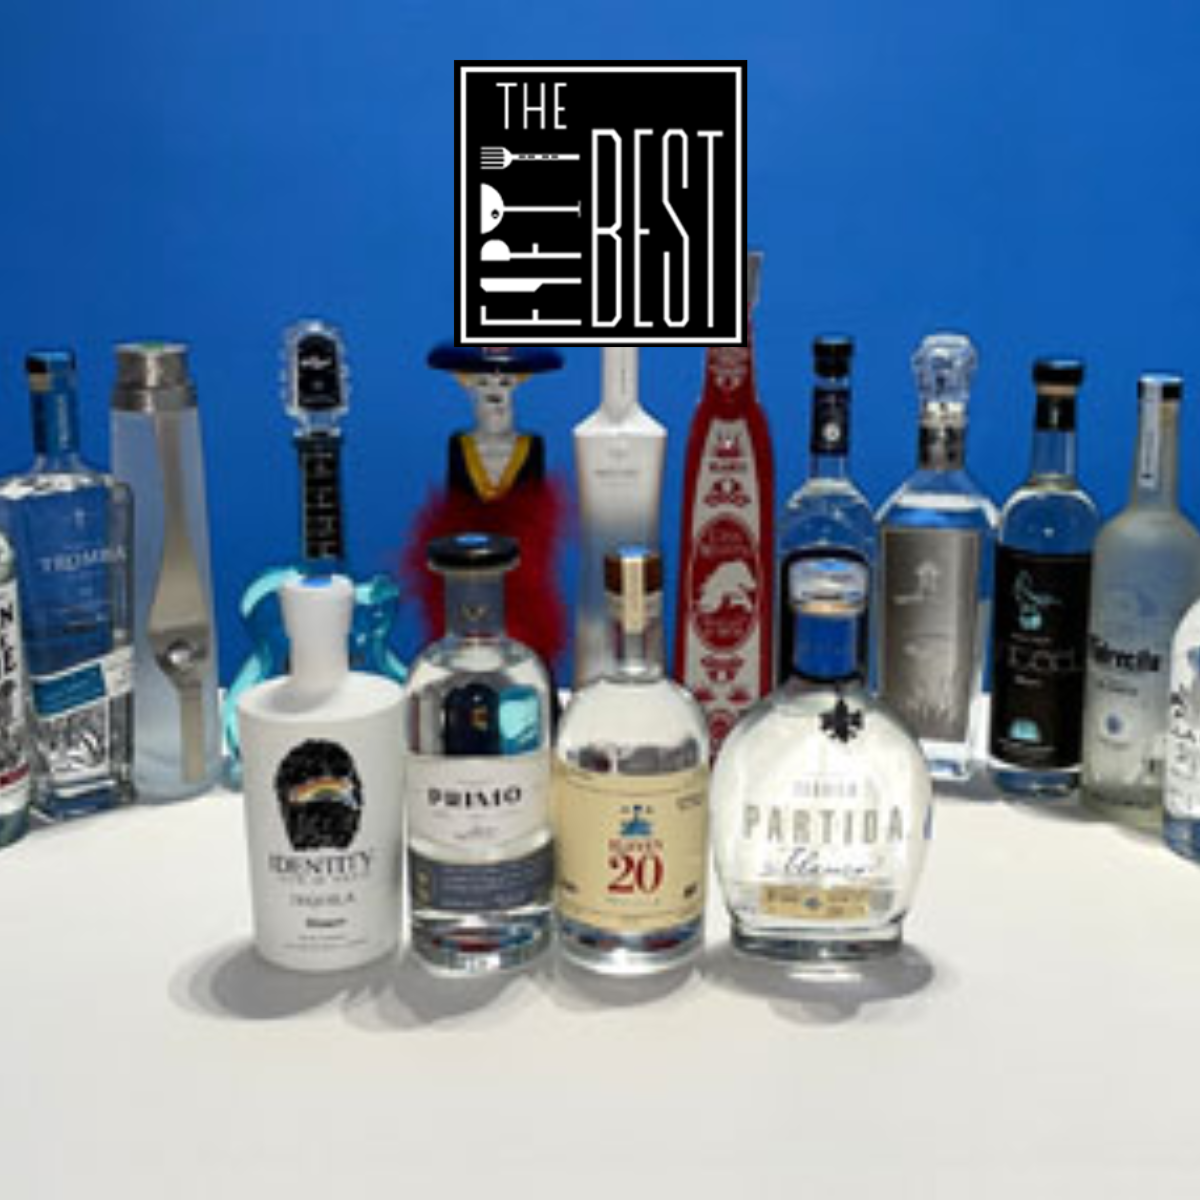 THE FIFTY BEST - Best Premium Blanco Tequila